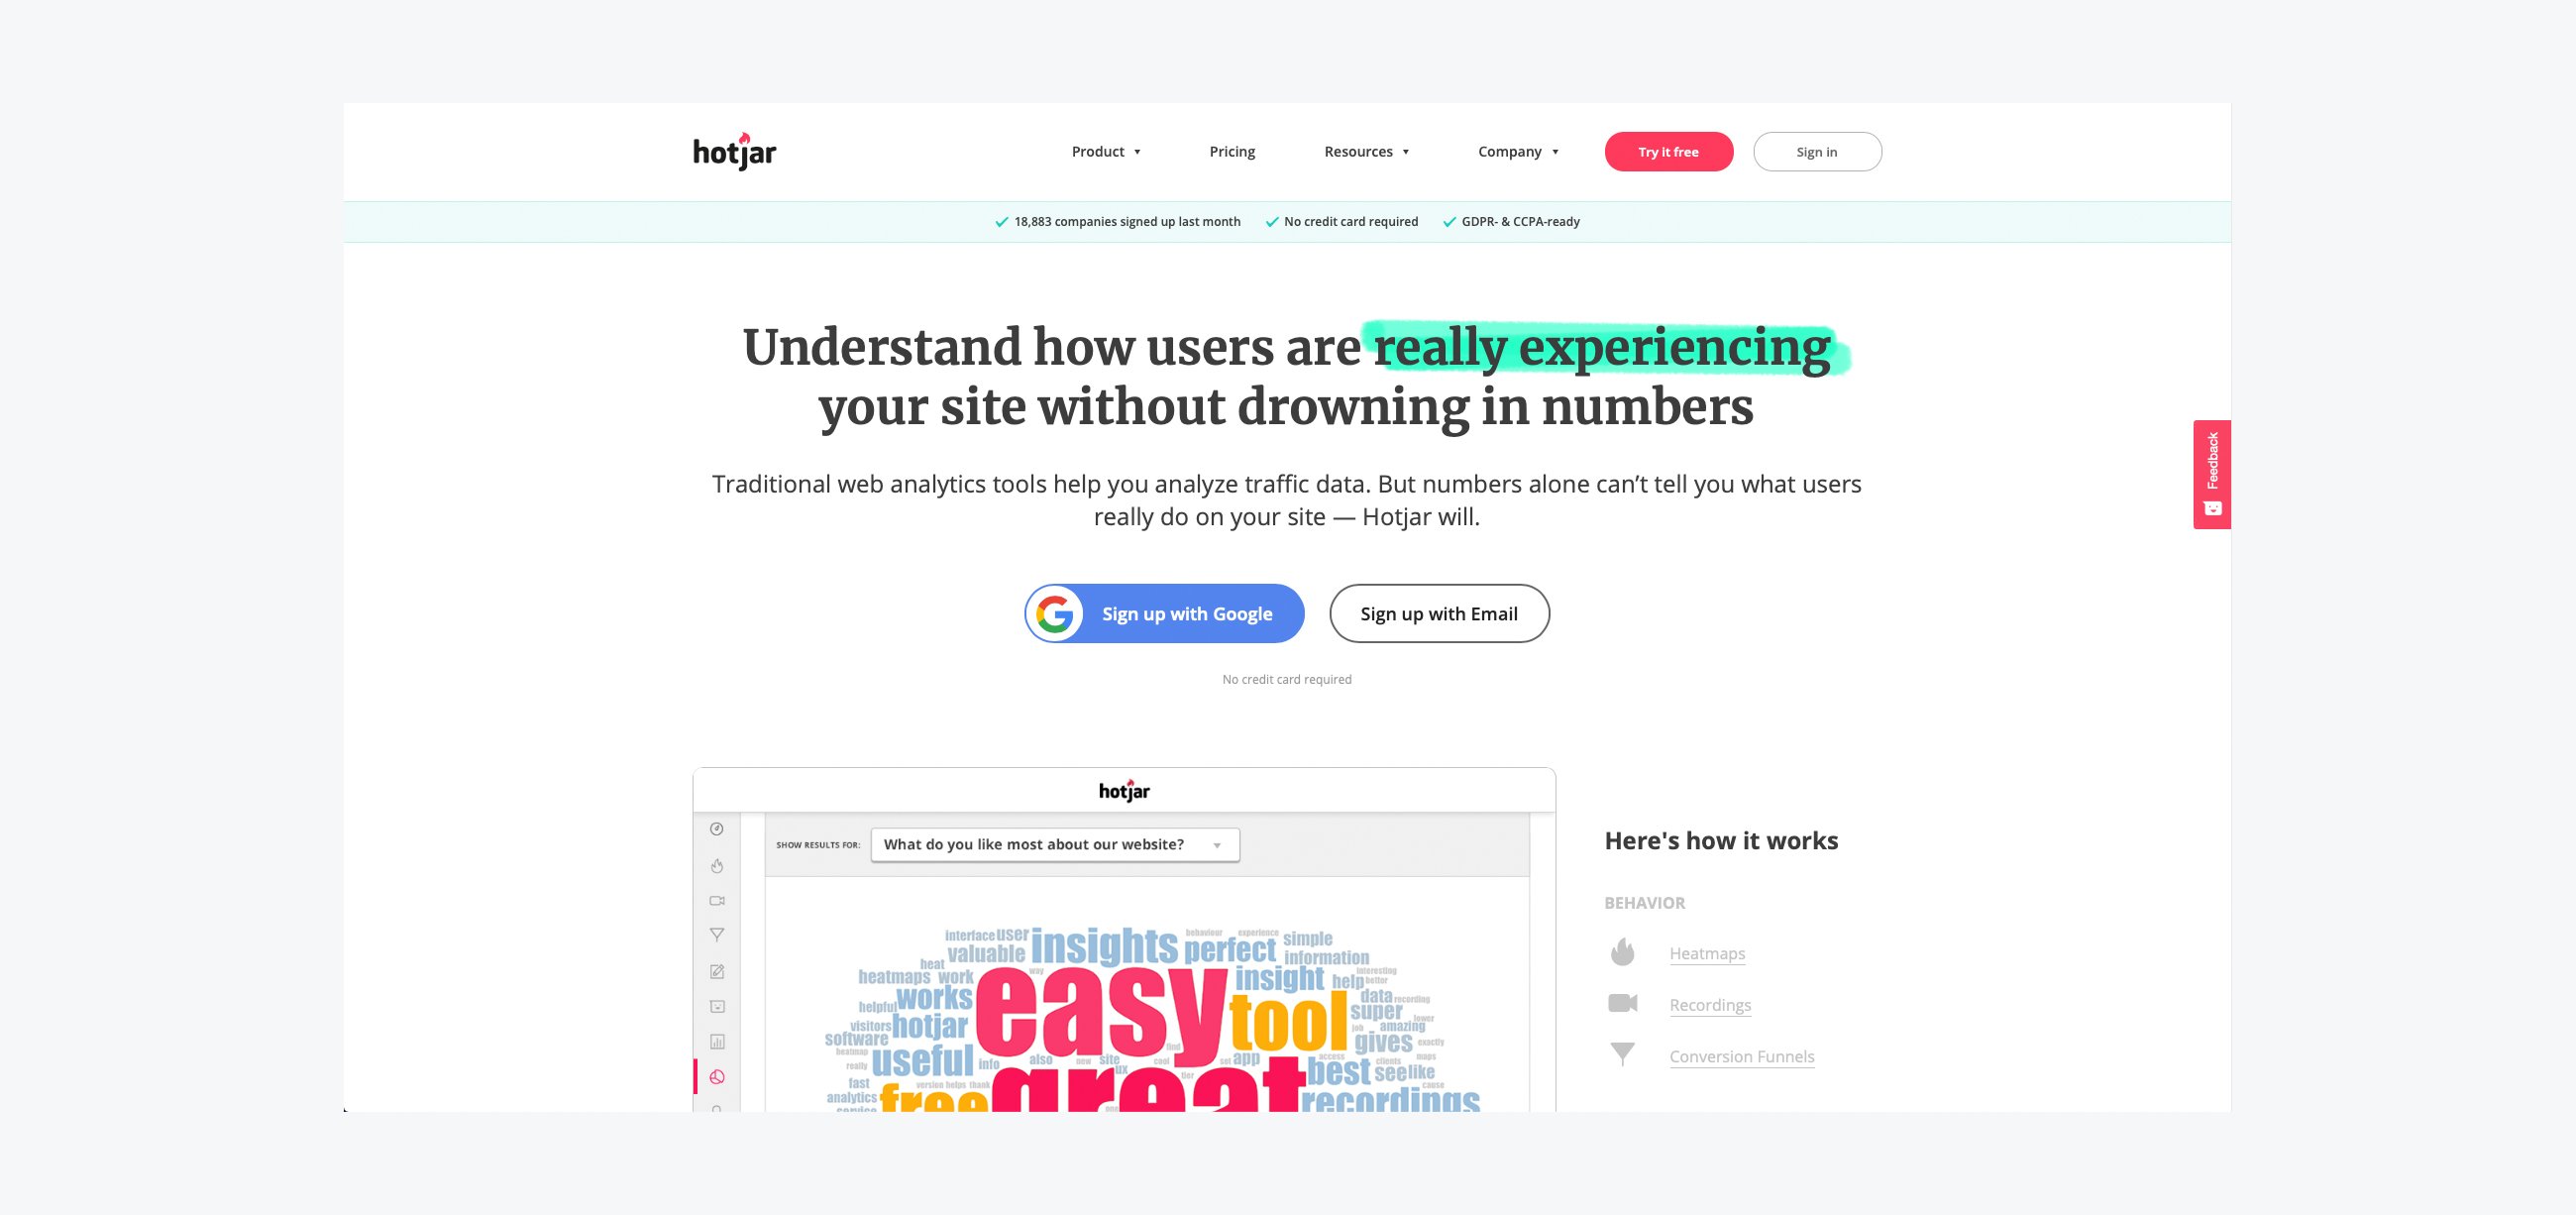 Top Tools To Analyze Your Product’s Performance - HotJar